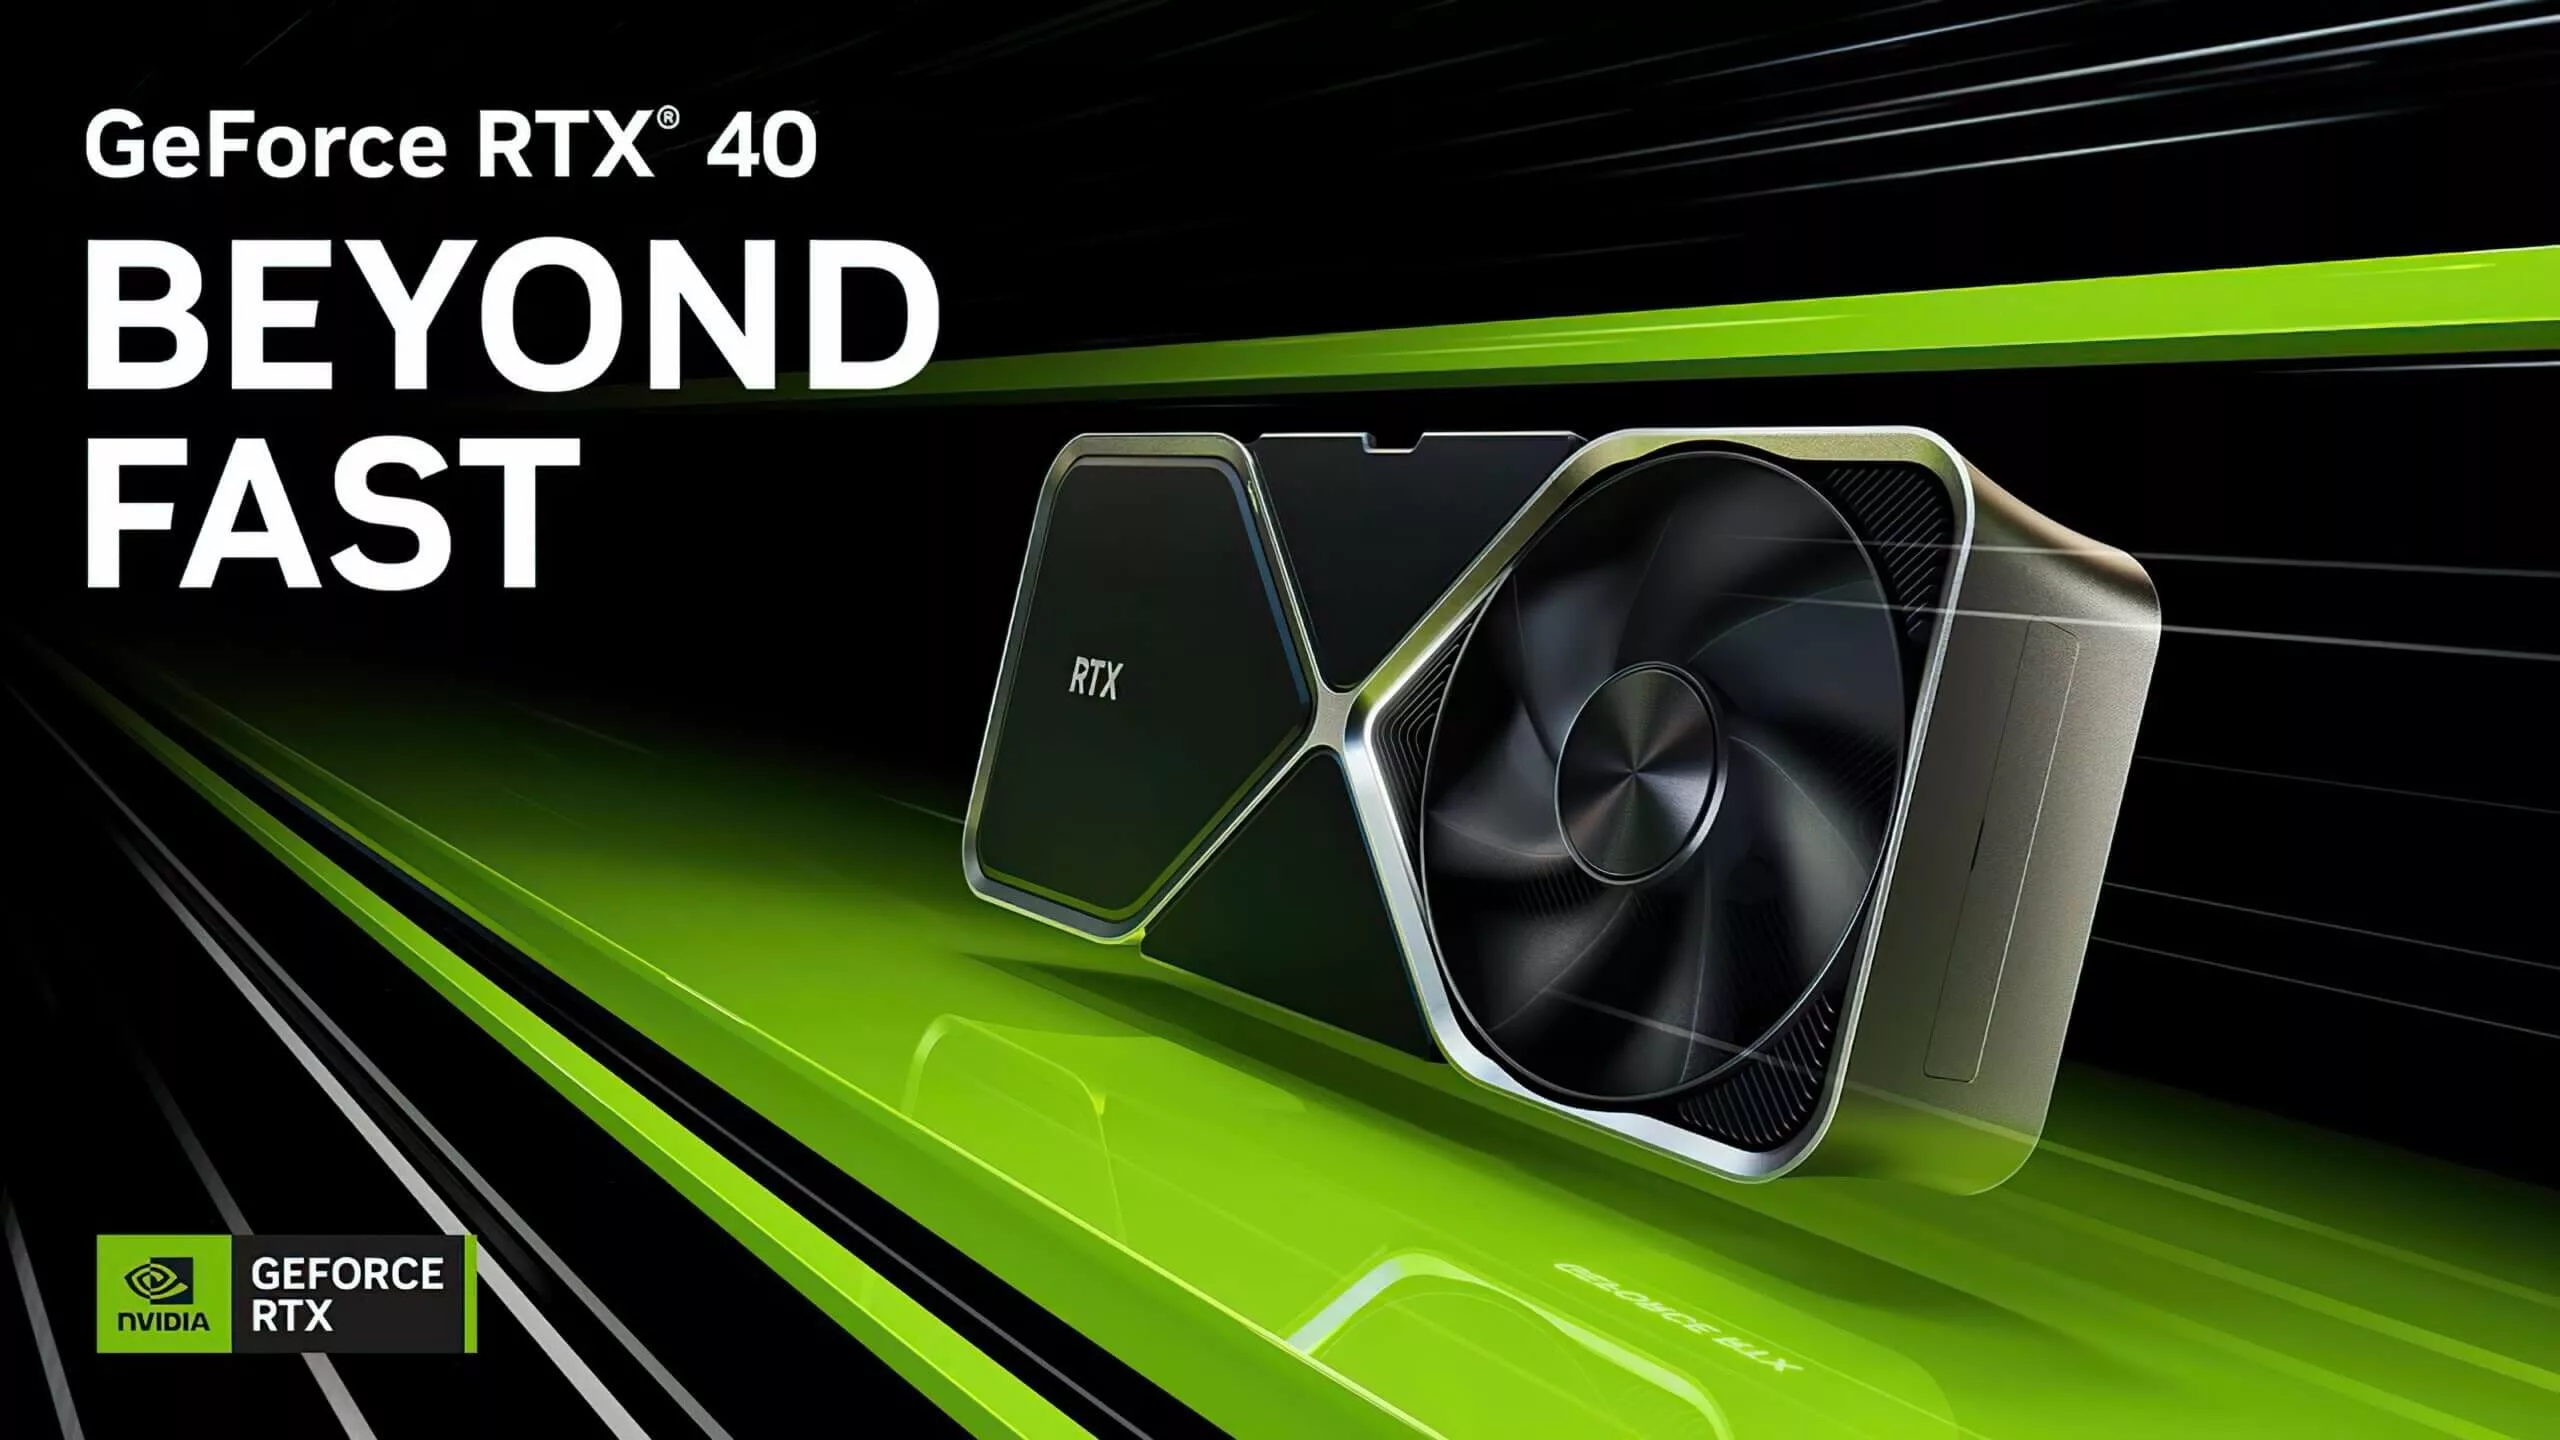 All that Nvidia announced at CES 2023: From RTX laptops to desktop RTX 4070Ti